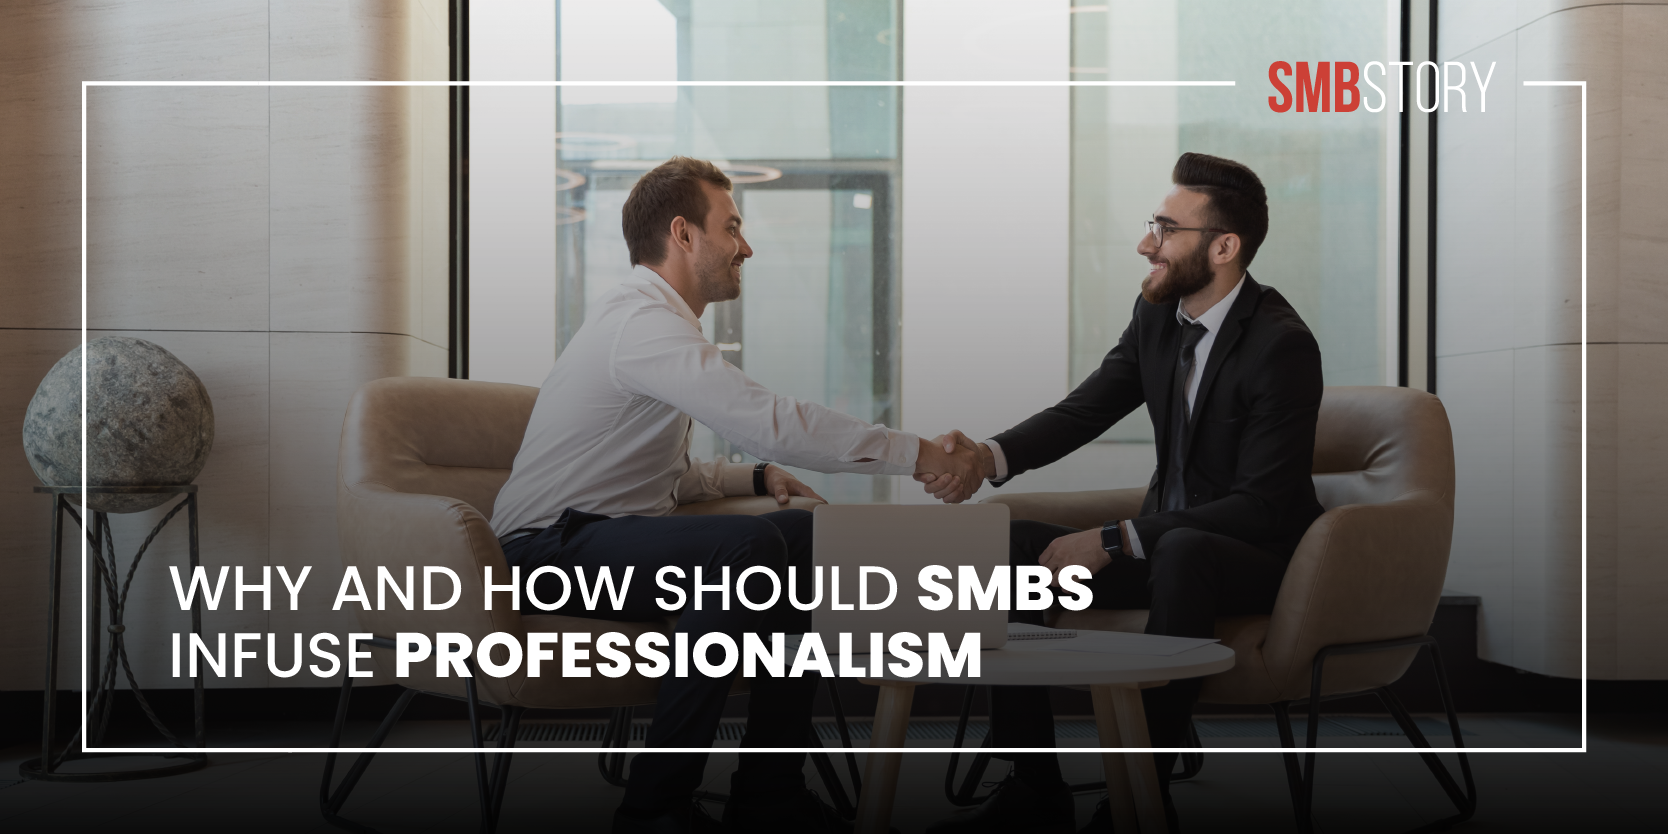 Why and how should SMBs infuse professionalism?